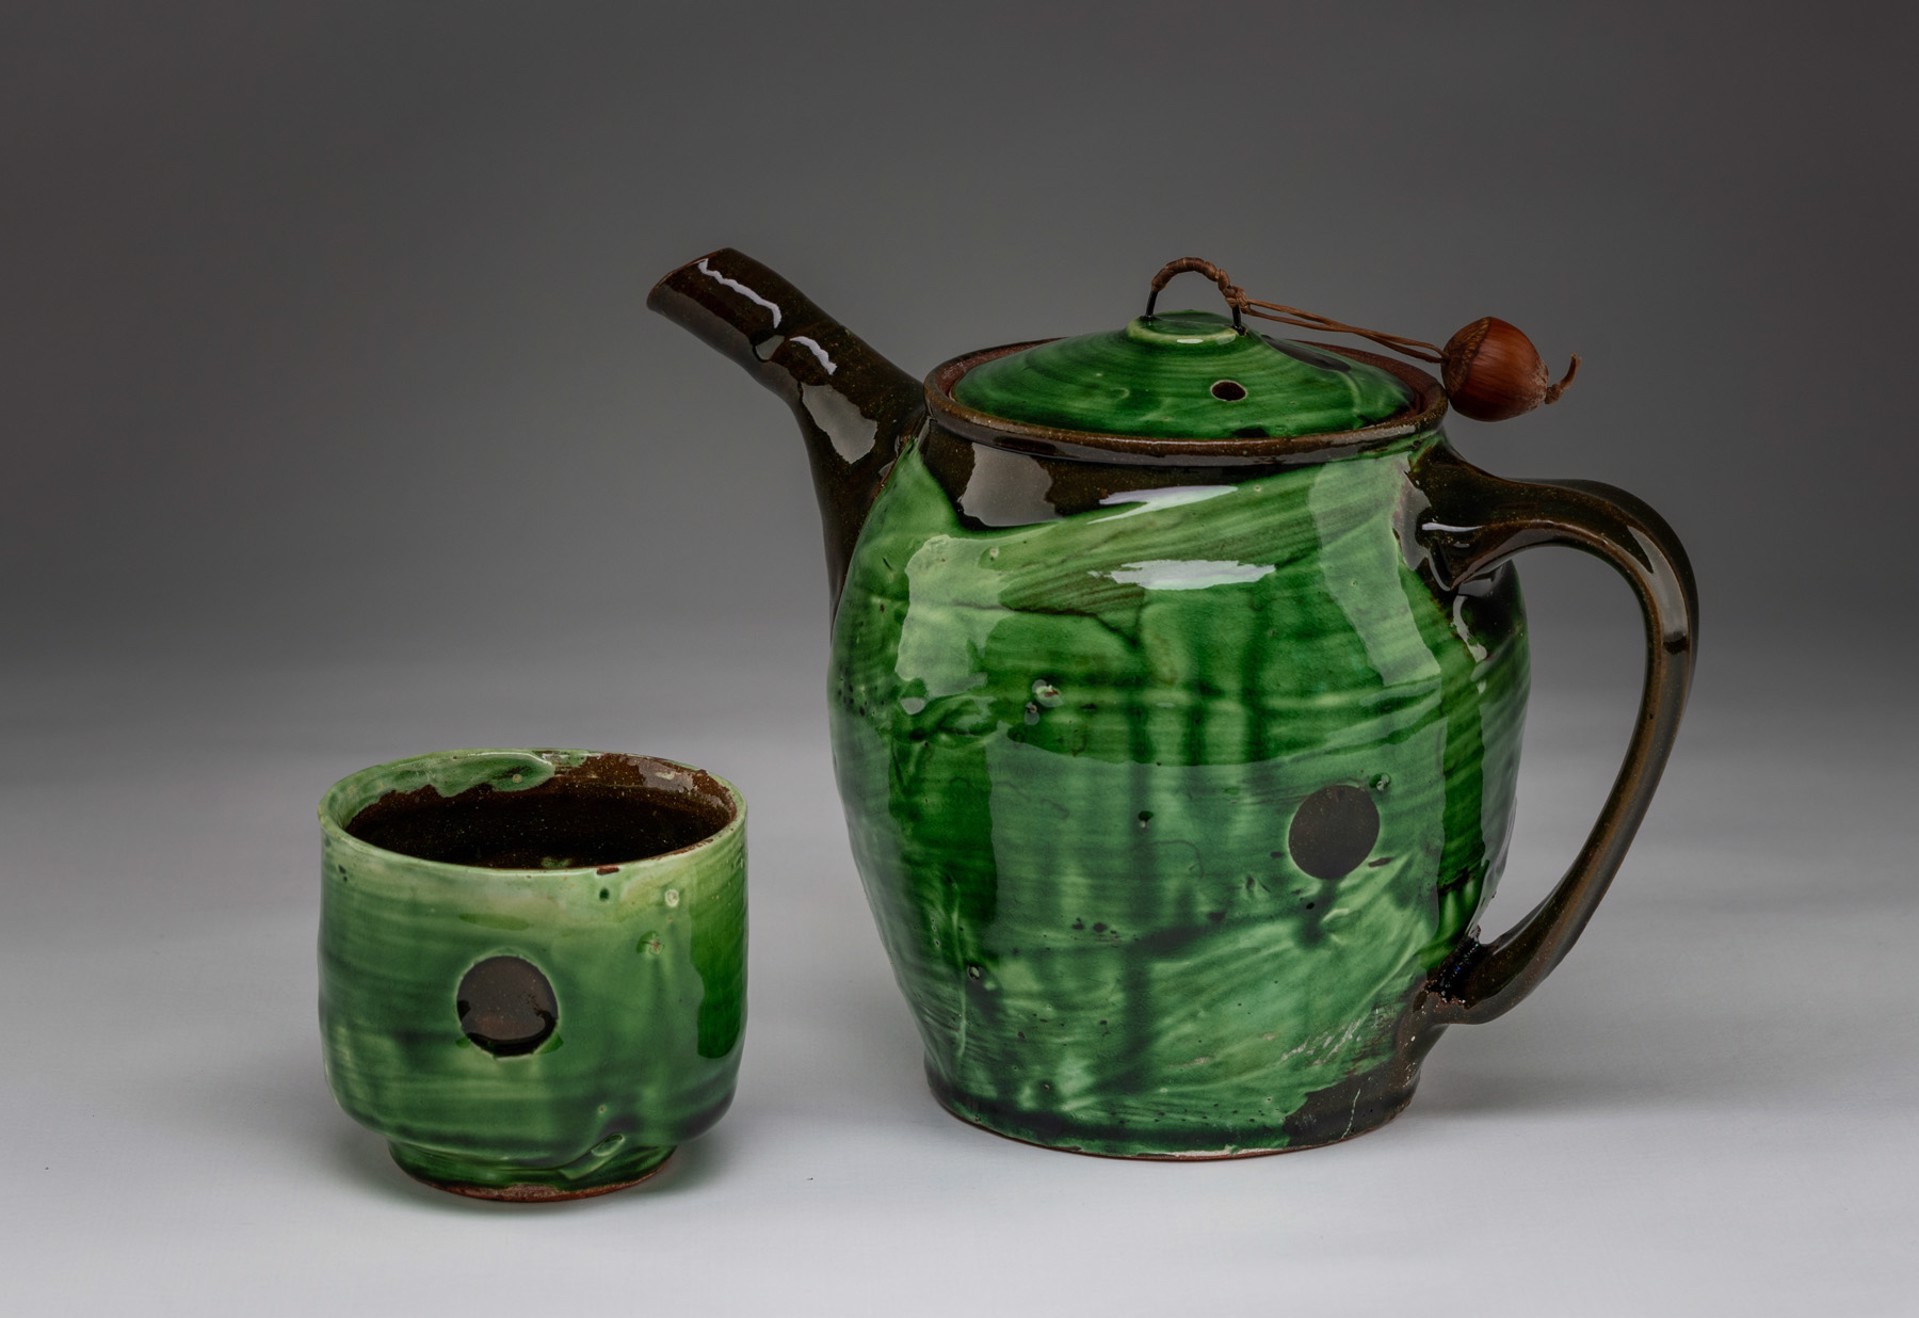 Teapot and Small Cup by Sandy Simon